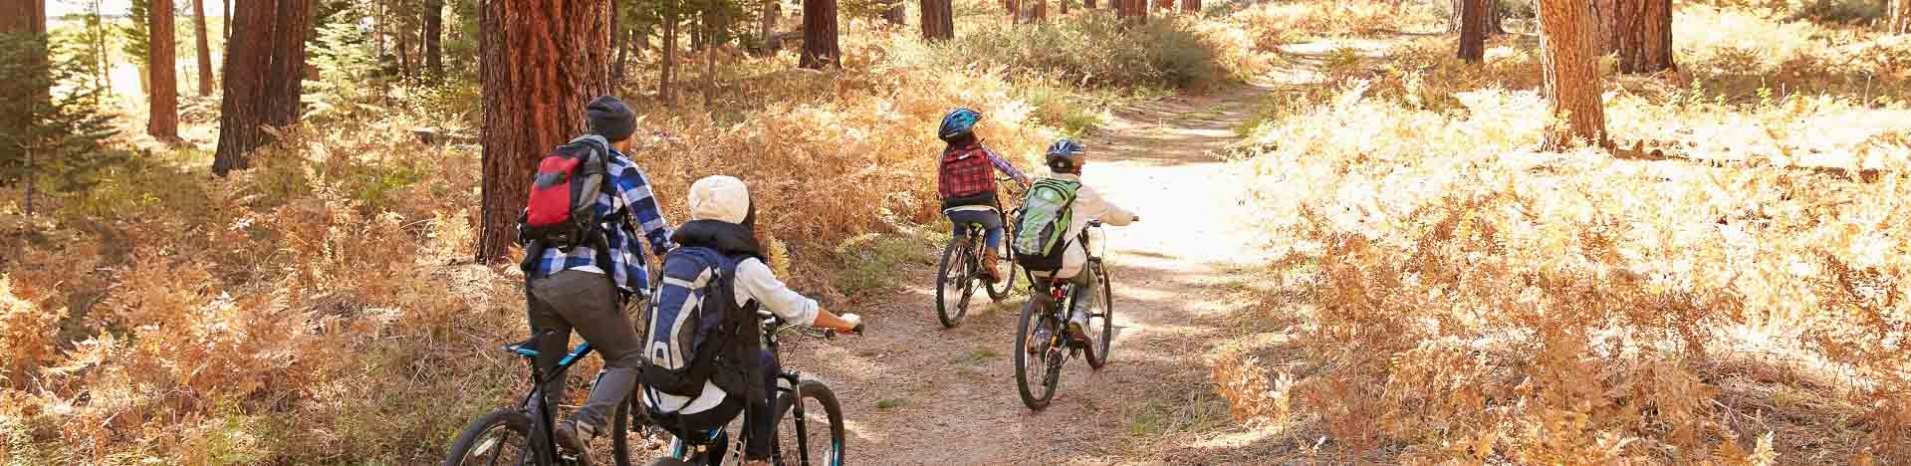 A family made up of two parents and two children biking through a wooded trail in the forest.